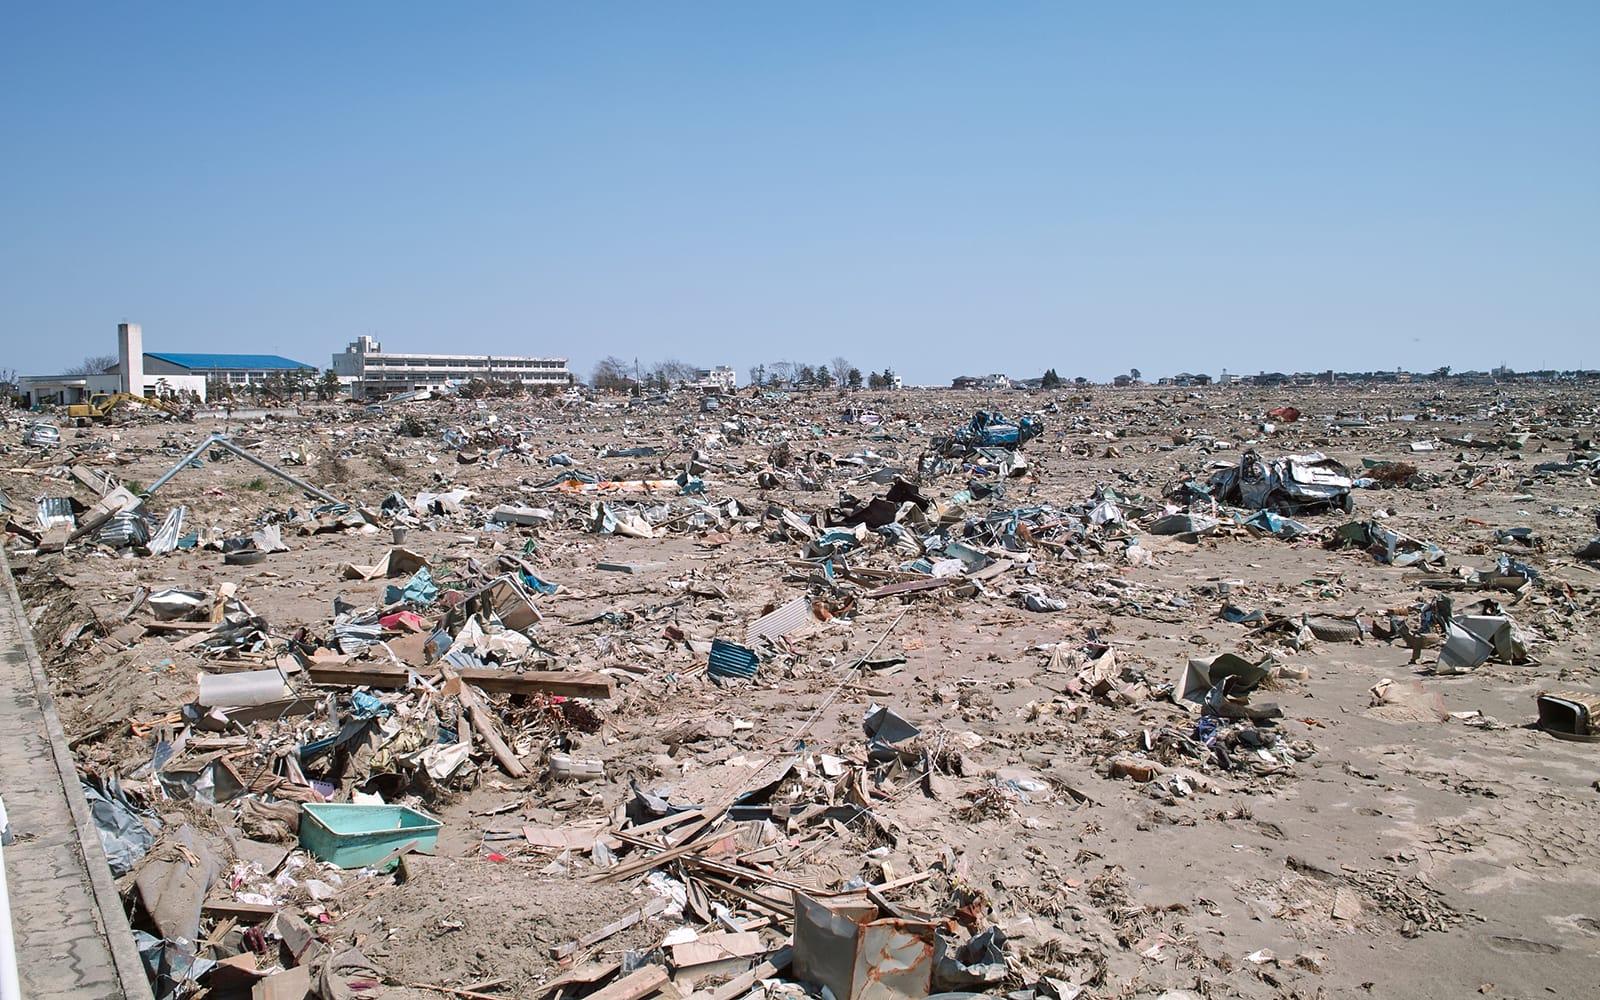 A field of debris and wreckage left behind by the 2011 tsunami